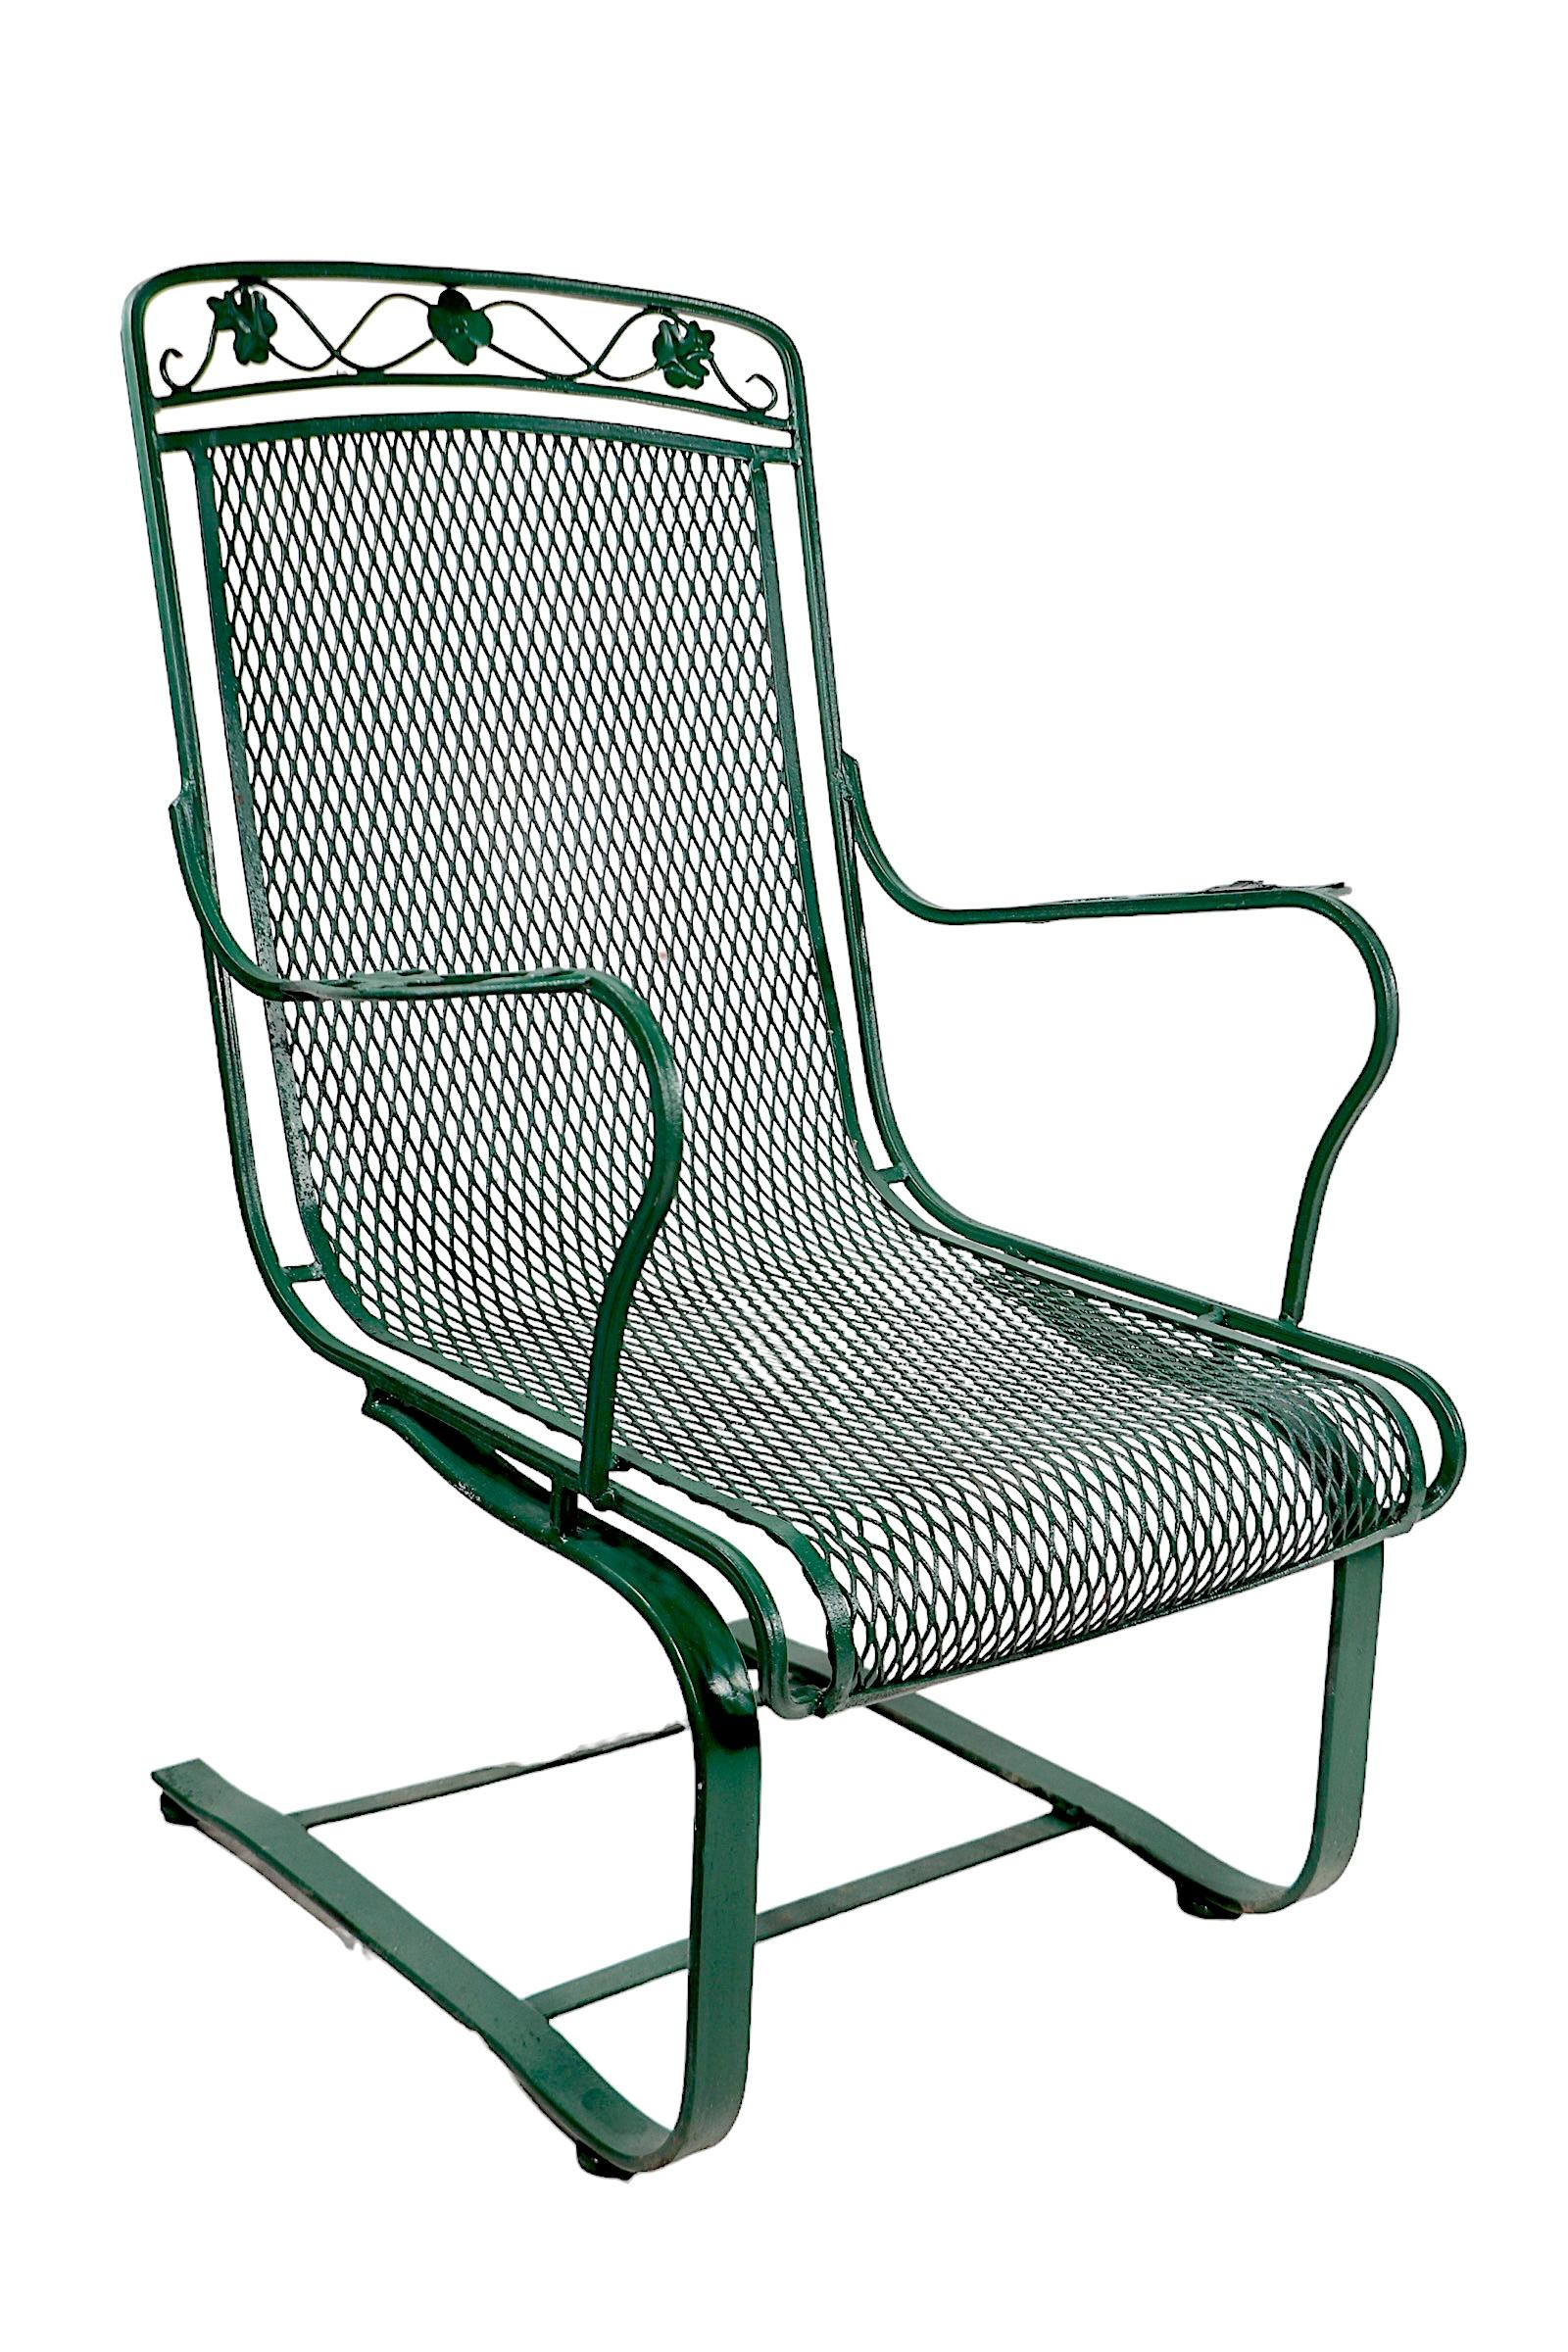 Hollywood Regency Pr. Cantilevered  Meadowcraft Dogwood Wrought Iron Lounge Chairs  For Sale